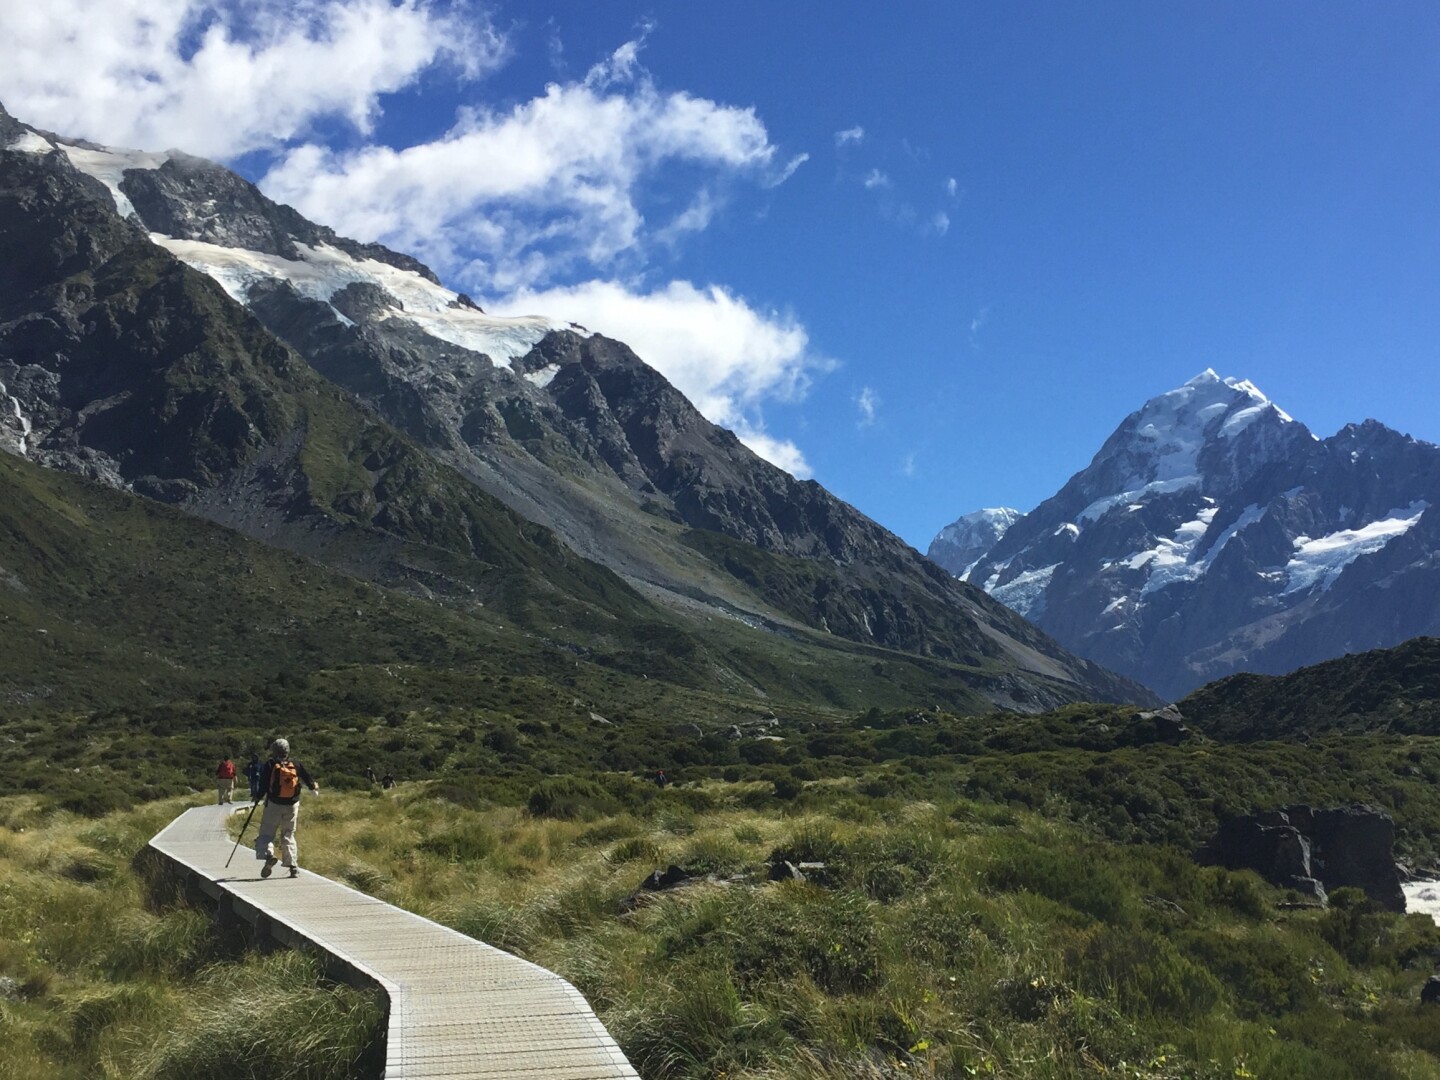 The walk up Hooker Valley is one of the most popular walks in Aoraki/Mt Cook National Park.